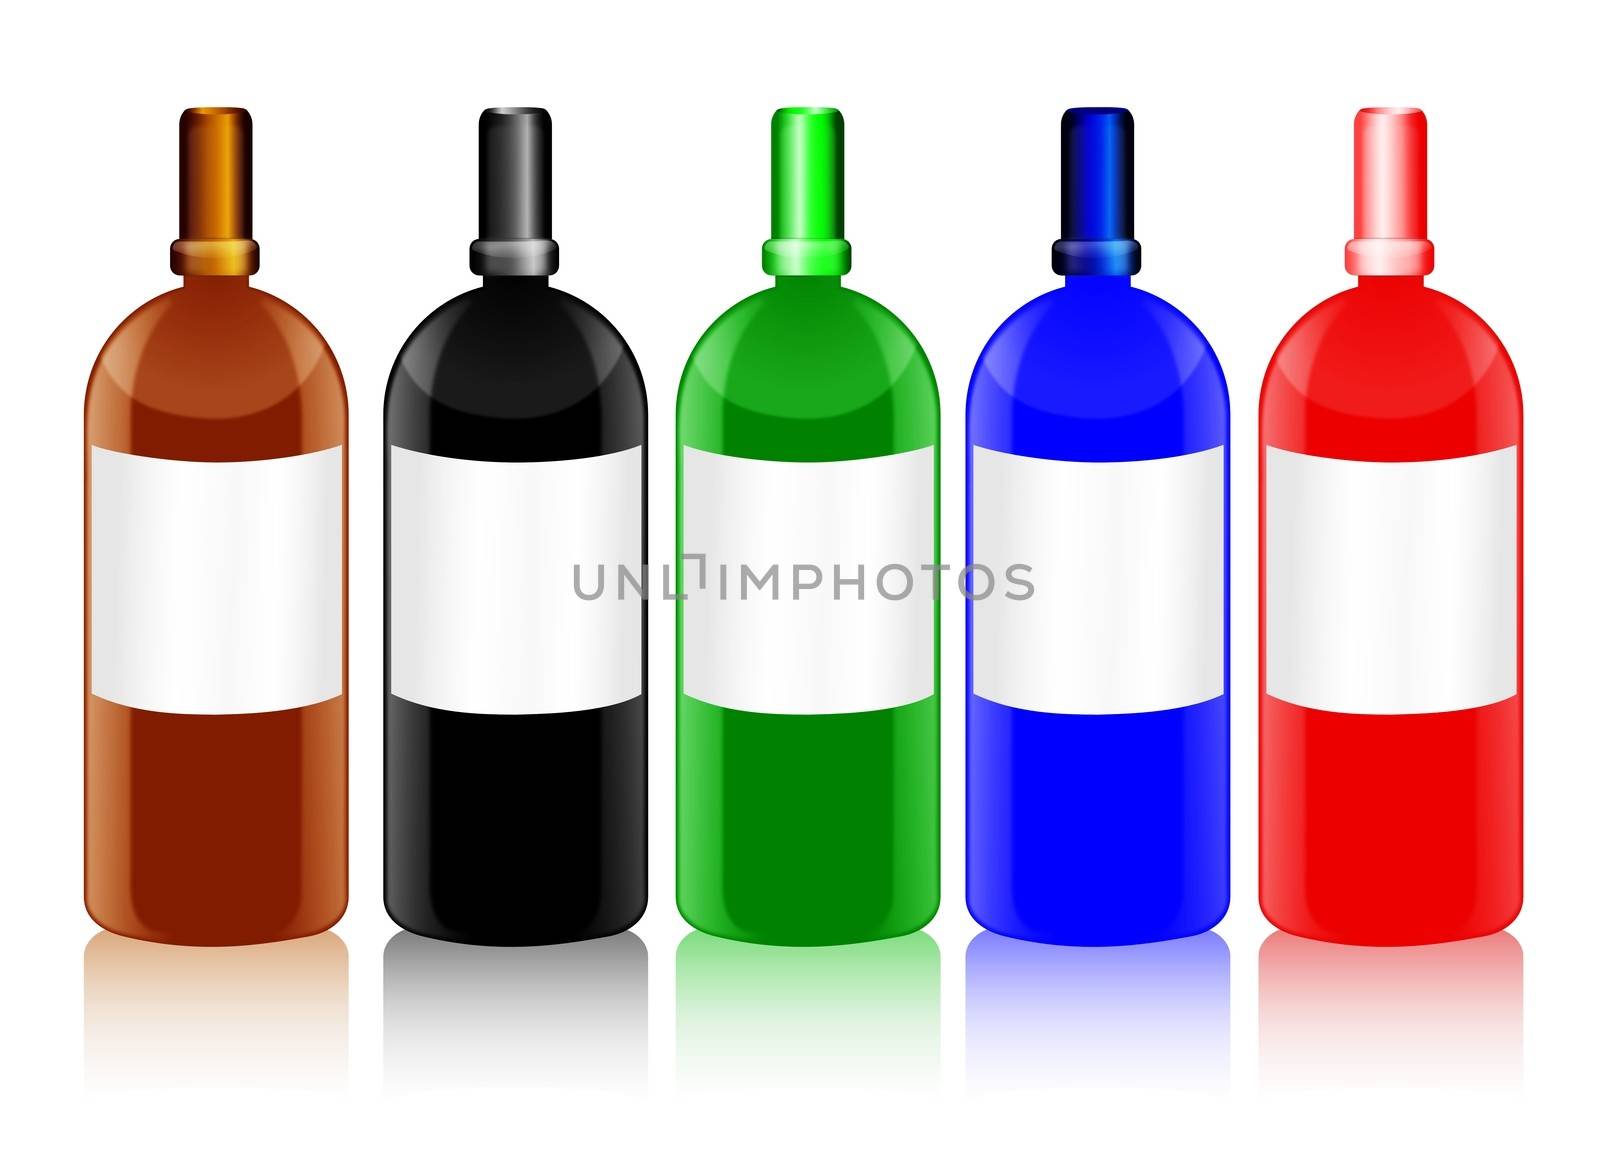 Set of shiny glass bottles with blank labels in different colors, with the shape resembling that of chemical or medicine bottles
